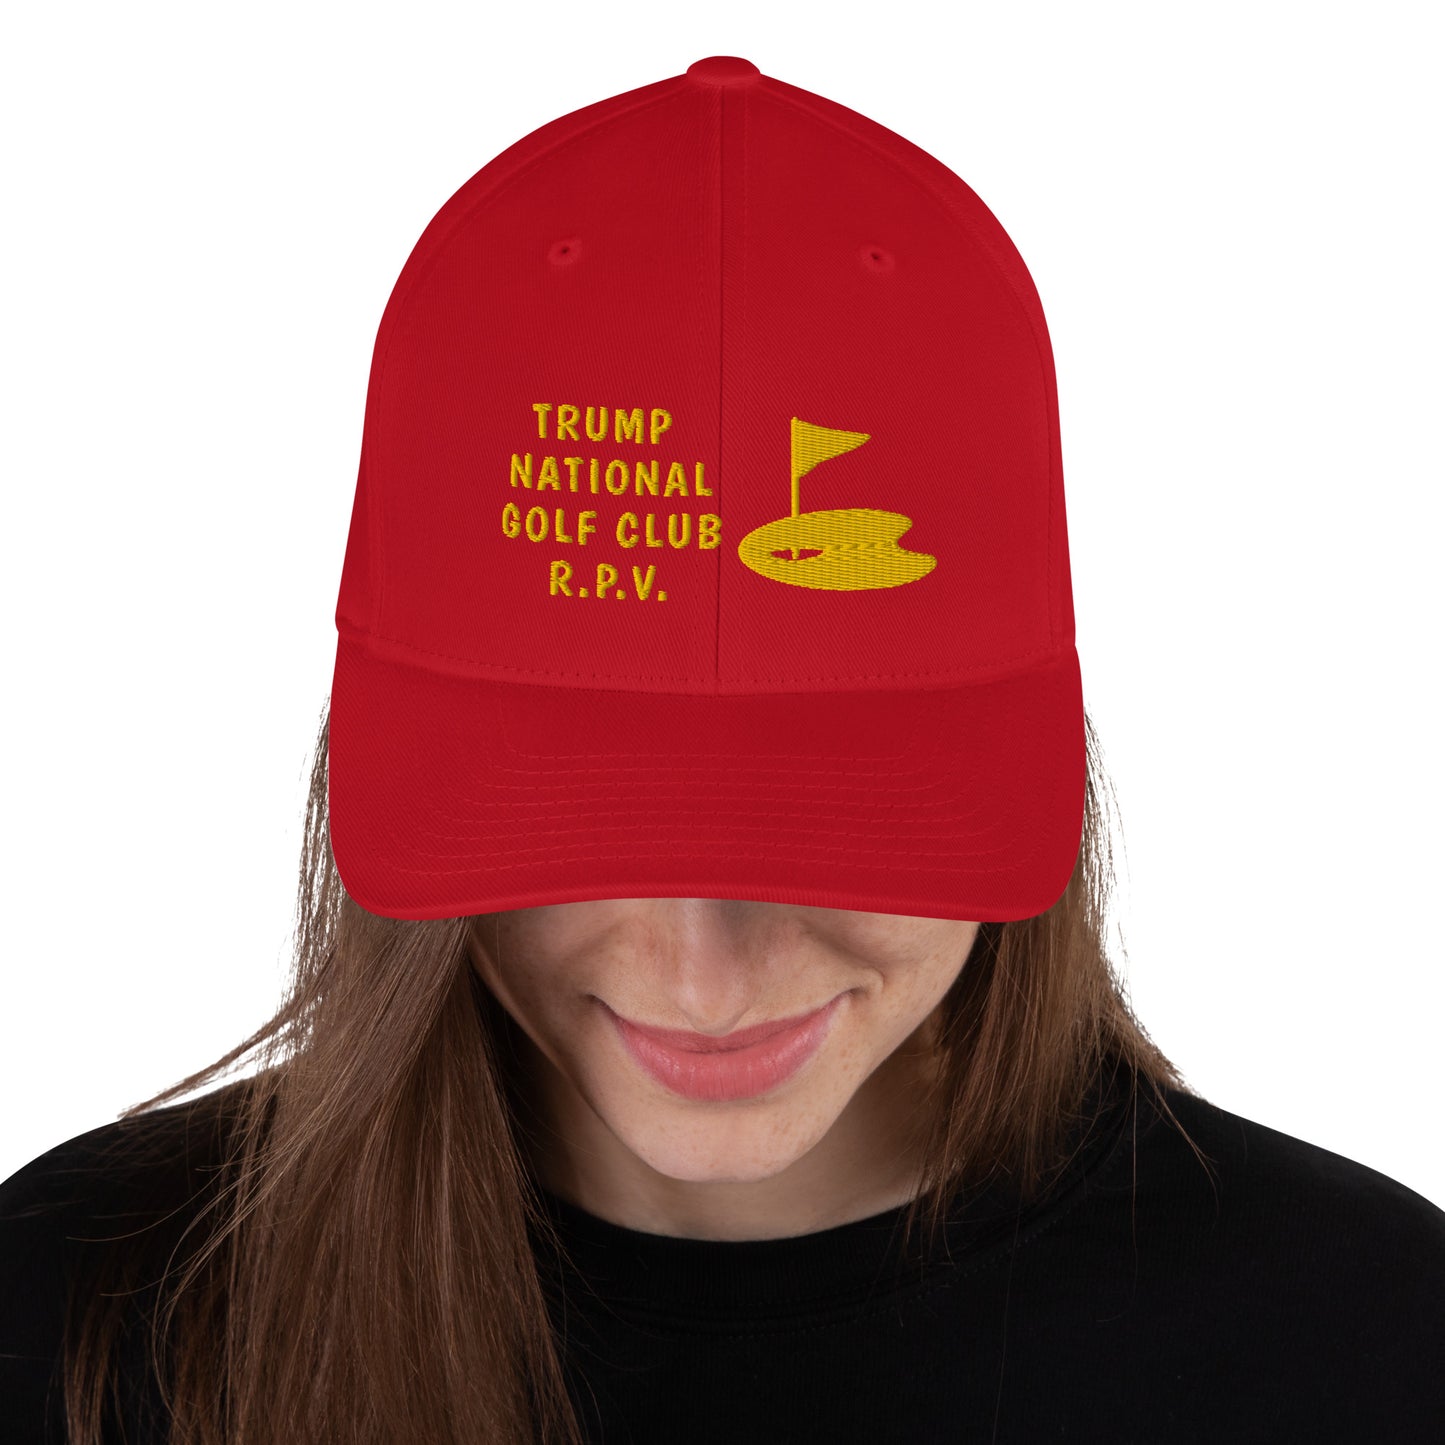 Trump National Golf Club - Rancho Palos Verdes - California - 90275 - Structured Twill Cap (Printed Front and Back TRUMP RPV GOLF)